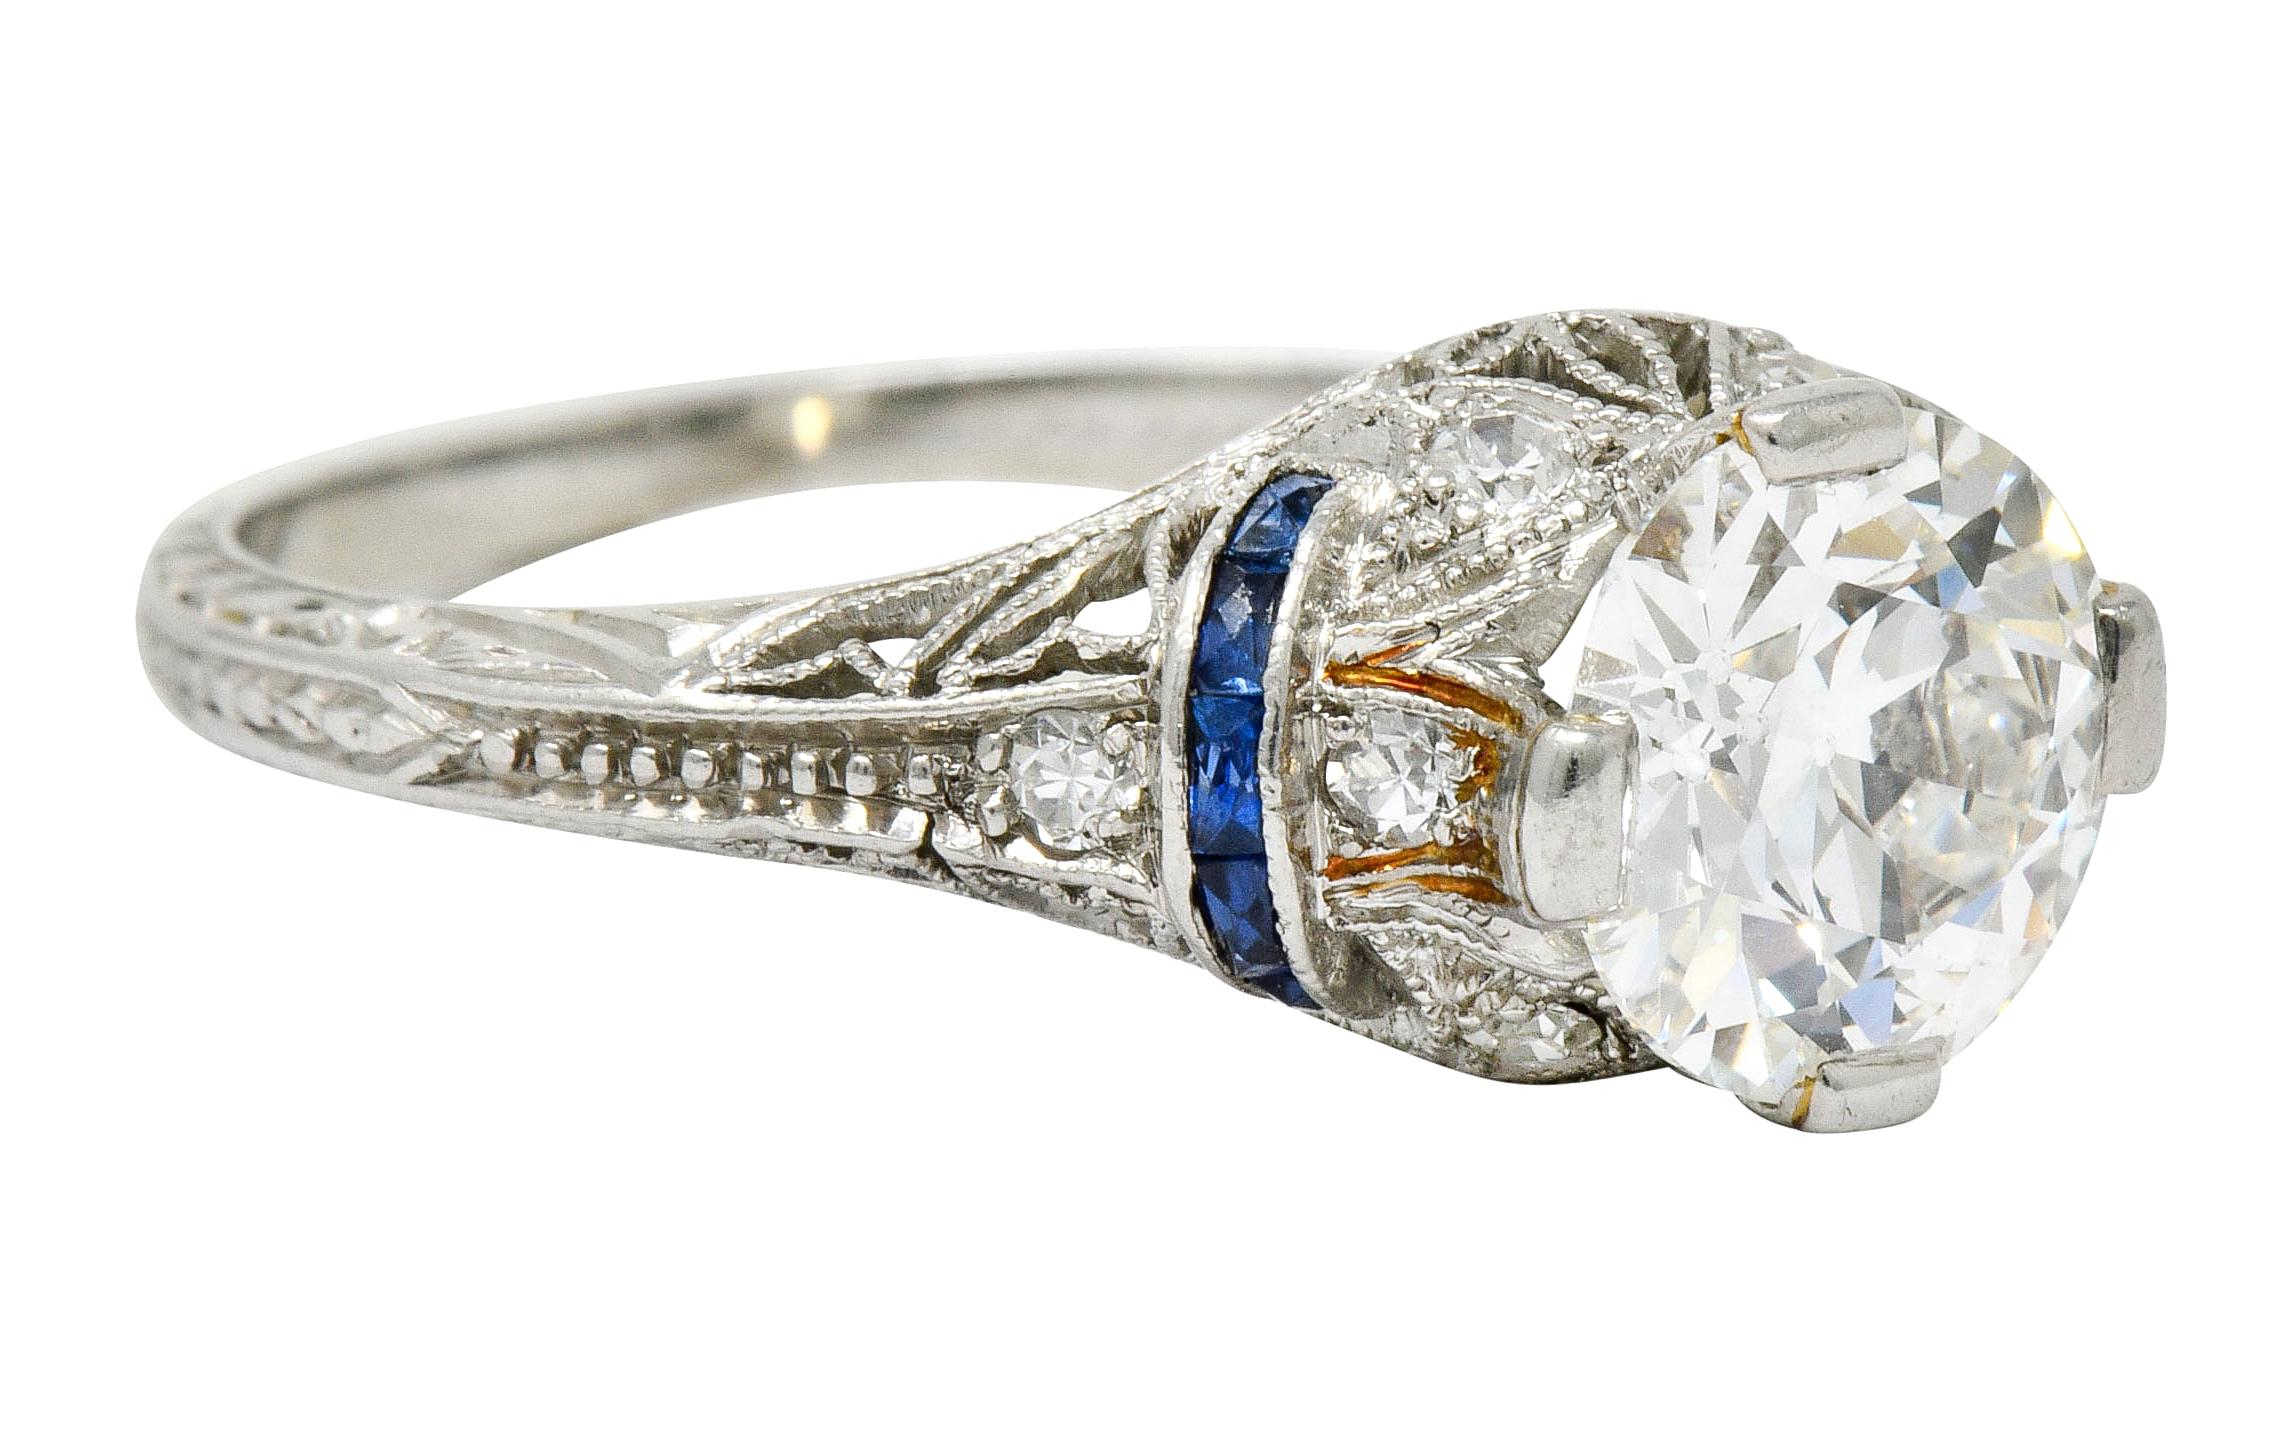 Centering an old European cut diamond weighing 1.30 carats, H in color with VS1 clarity

Flanked by two arches of calibrè cut sapphire, well-matched and royal blue in color

Accented throughout by single cut diamonds weighing approximately 0.15